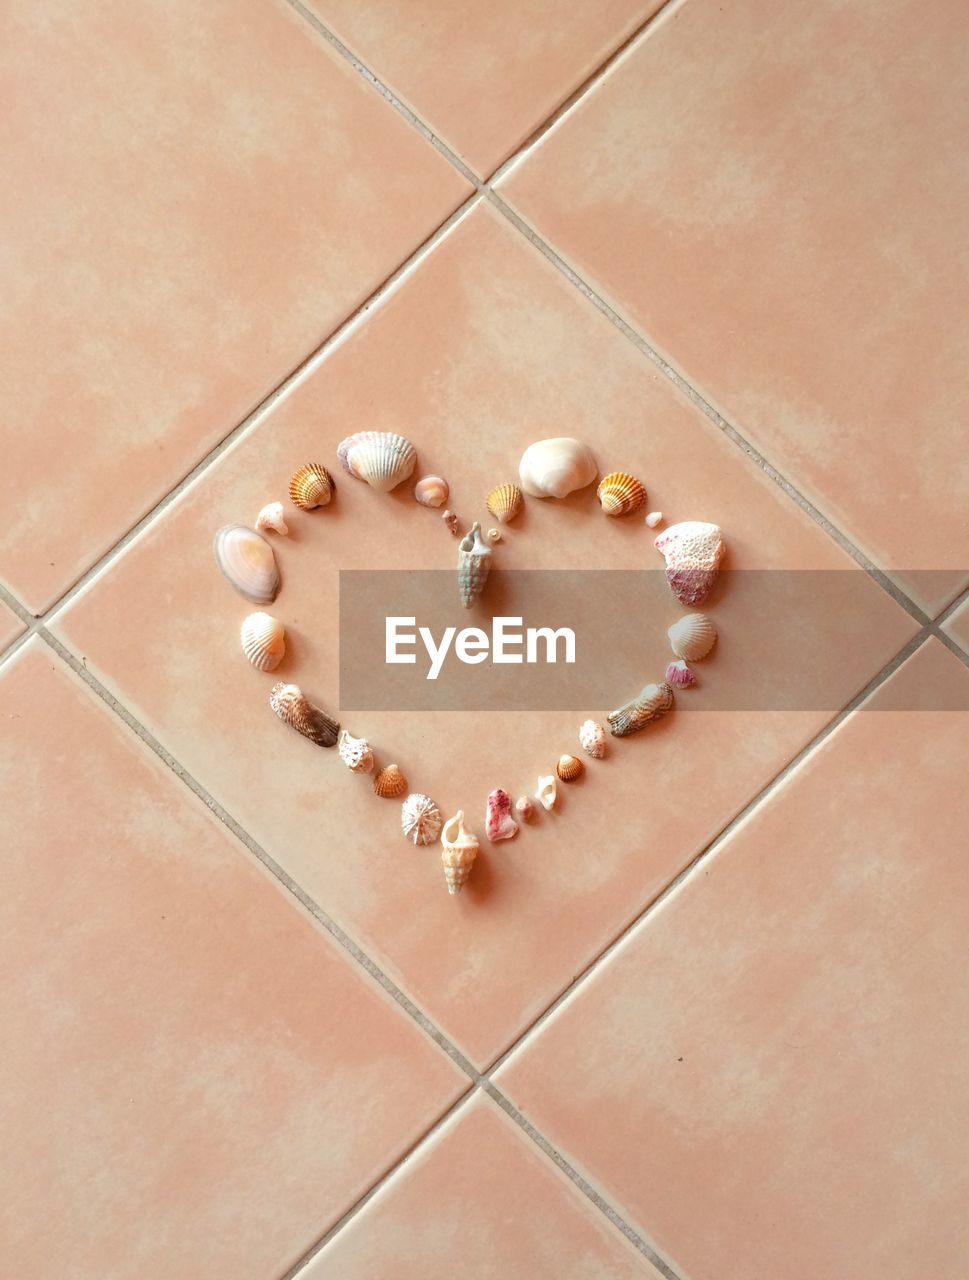 High angle view of heart shape made by seashells on tiled floor